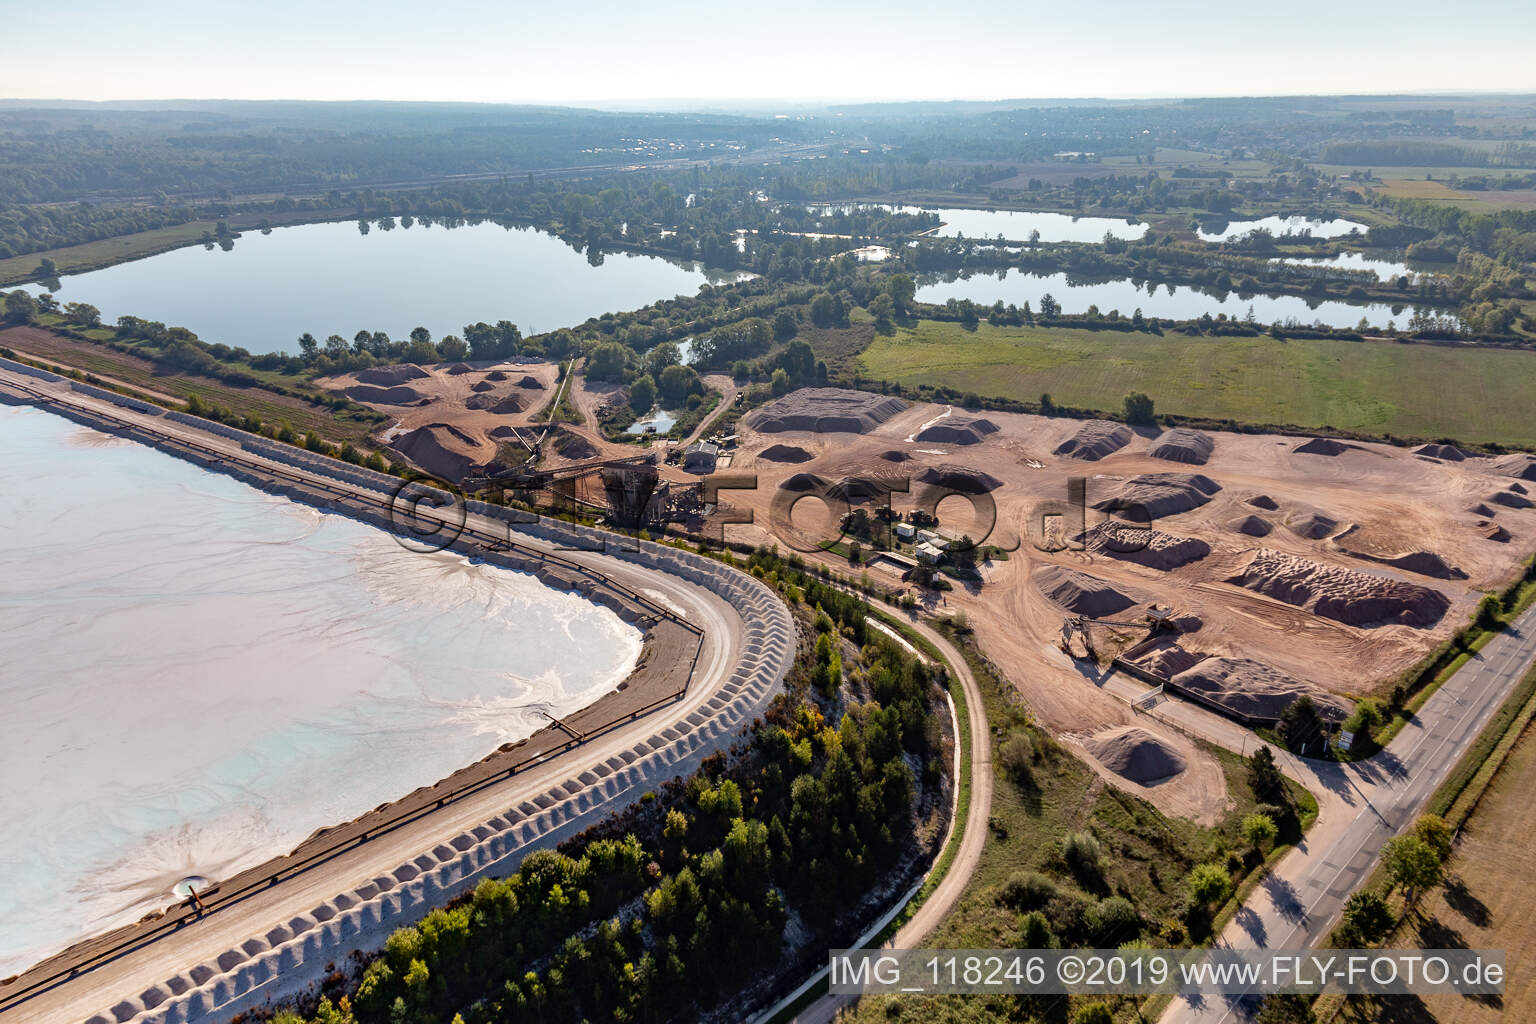 Bird's eye view of Salt pans in Rosières-aux-Salines in the state Meurthe et Moselle, France